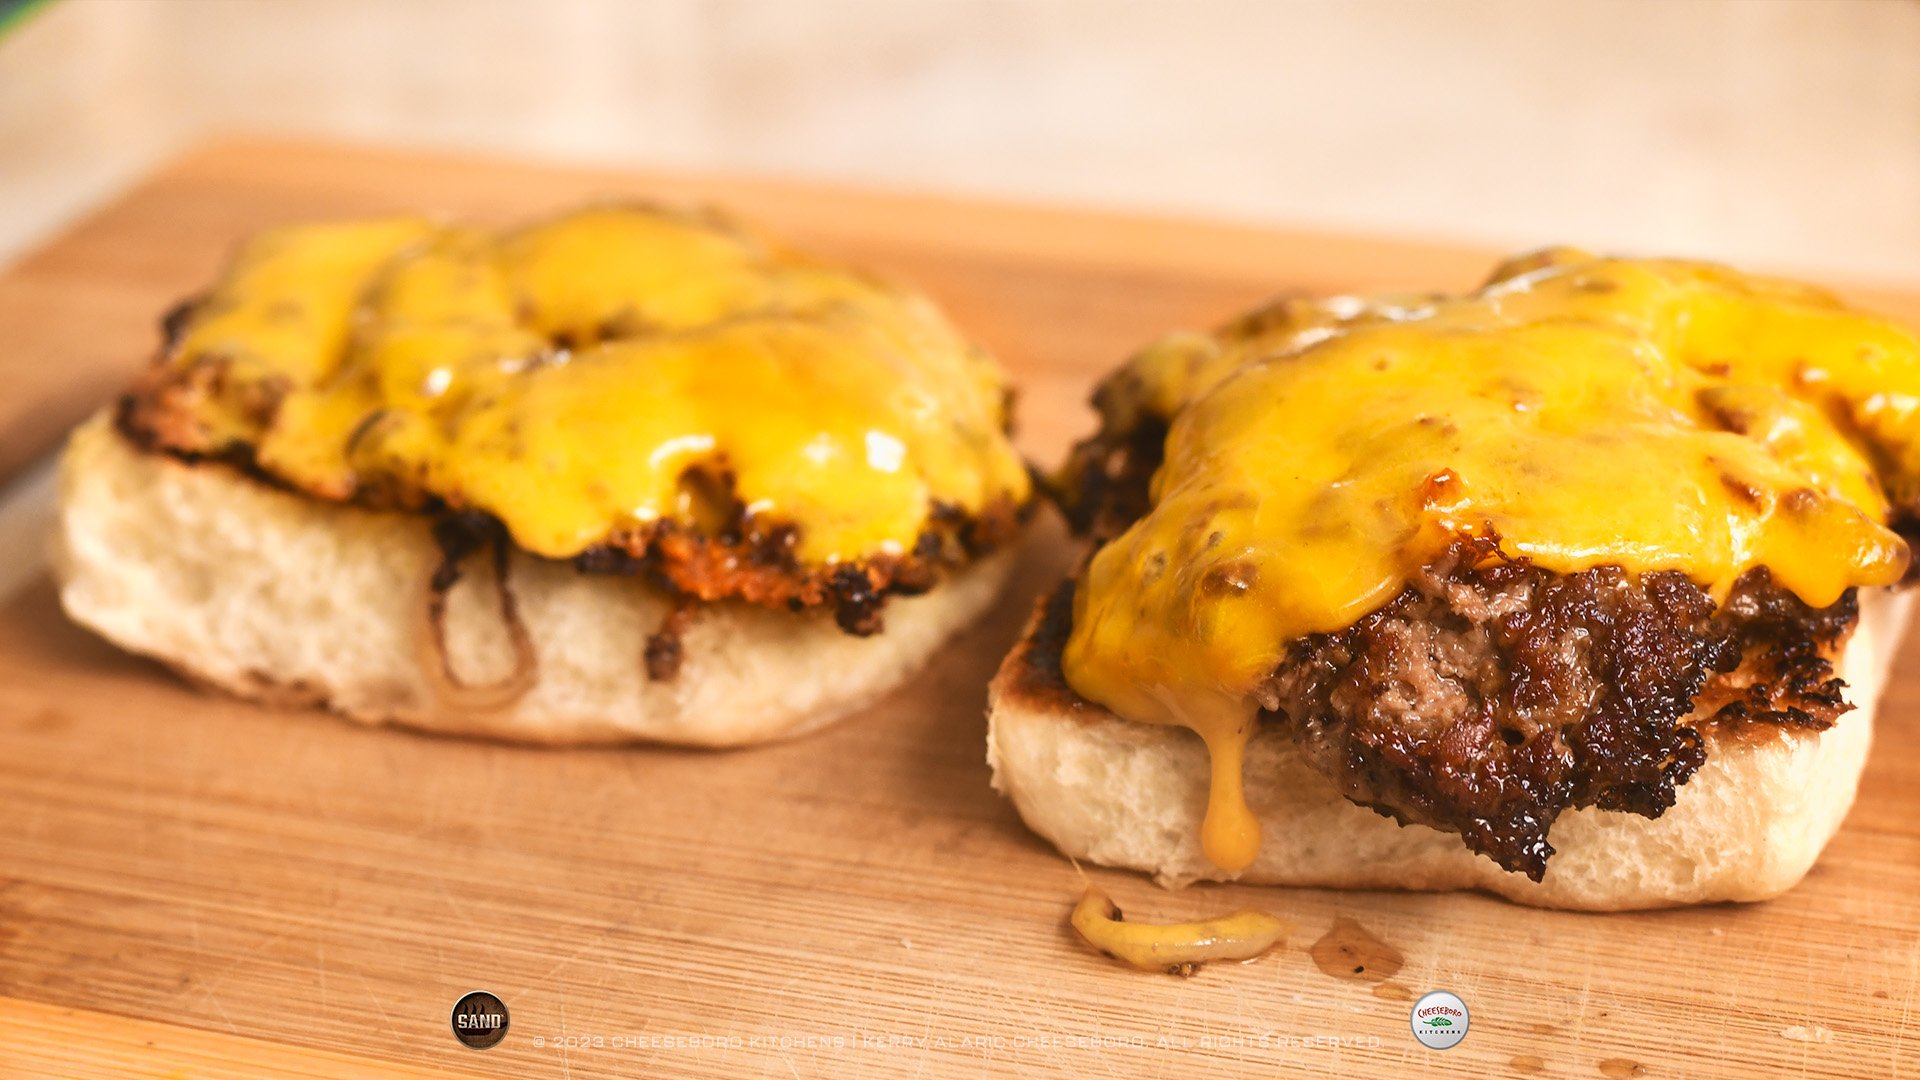 cheeskitch-230813-sand-beef-cheddar-smashburger-with-cheese-1-1920-hor.jpg